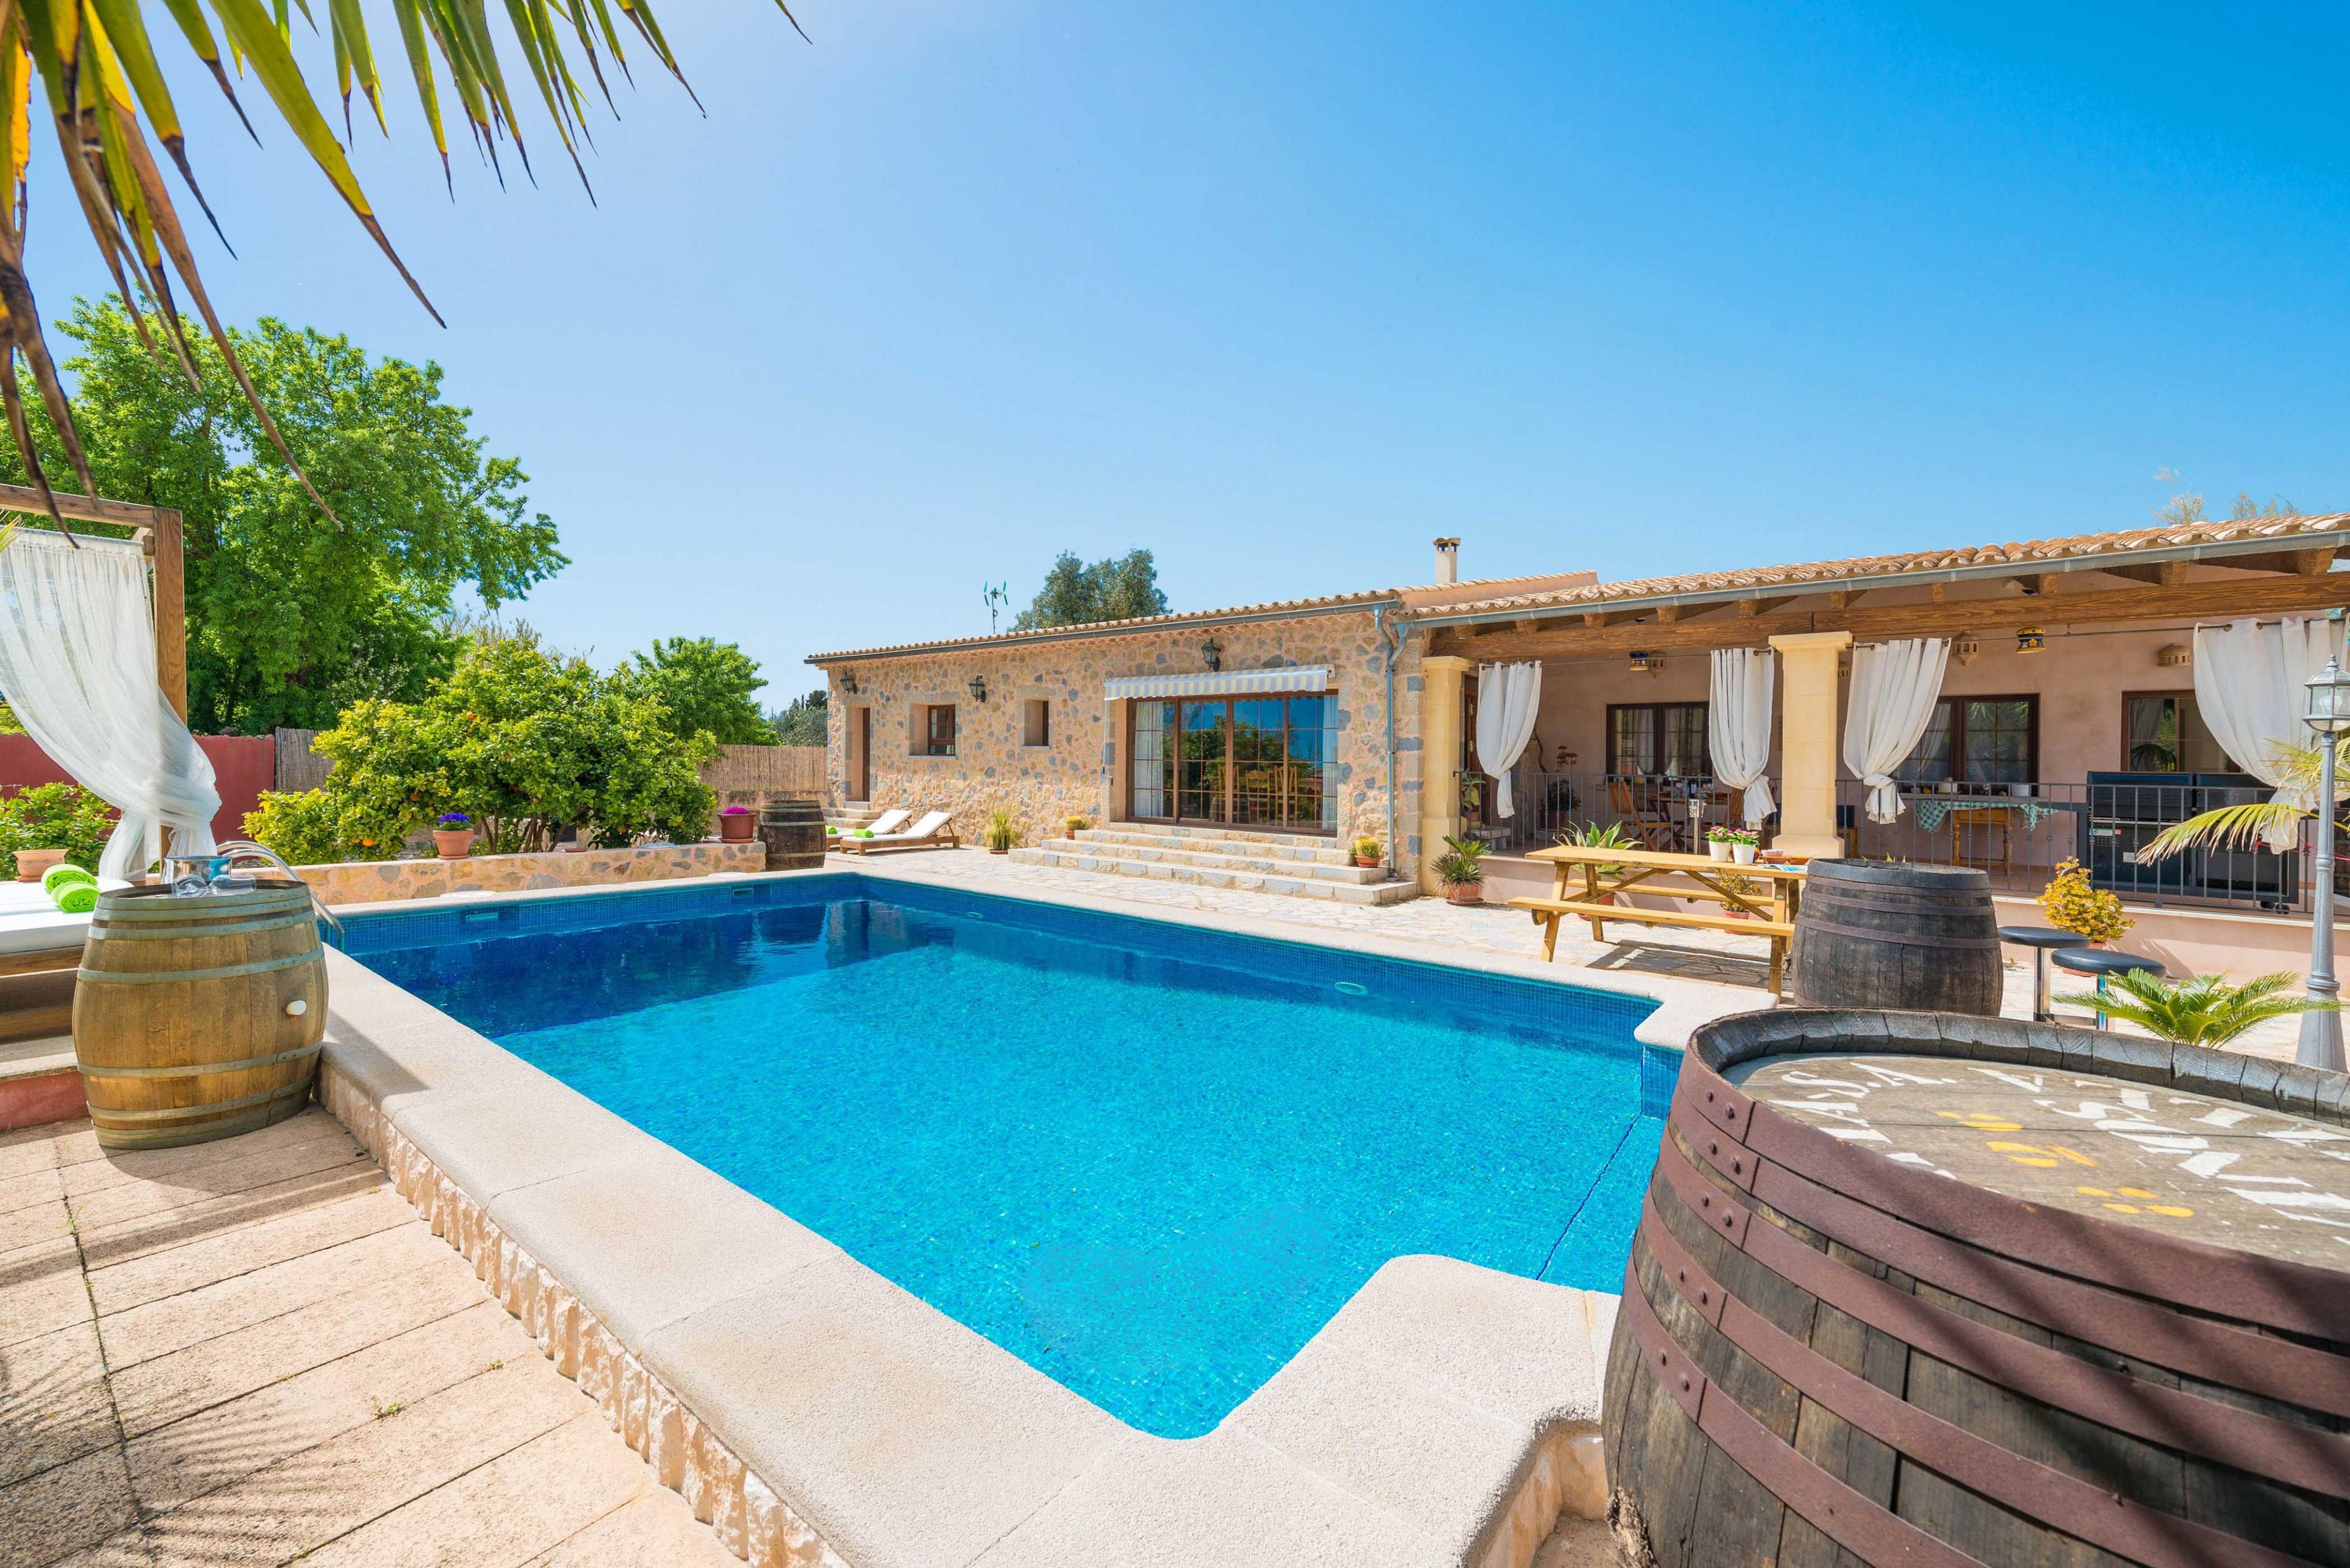 Property Image 1 - ES BLANQUER DE NA FANI - Villa with private pool in Binissalem. Free WiFi